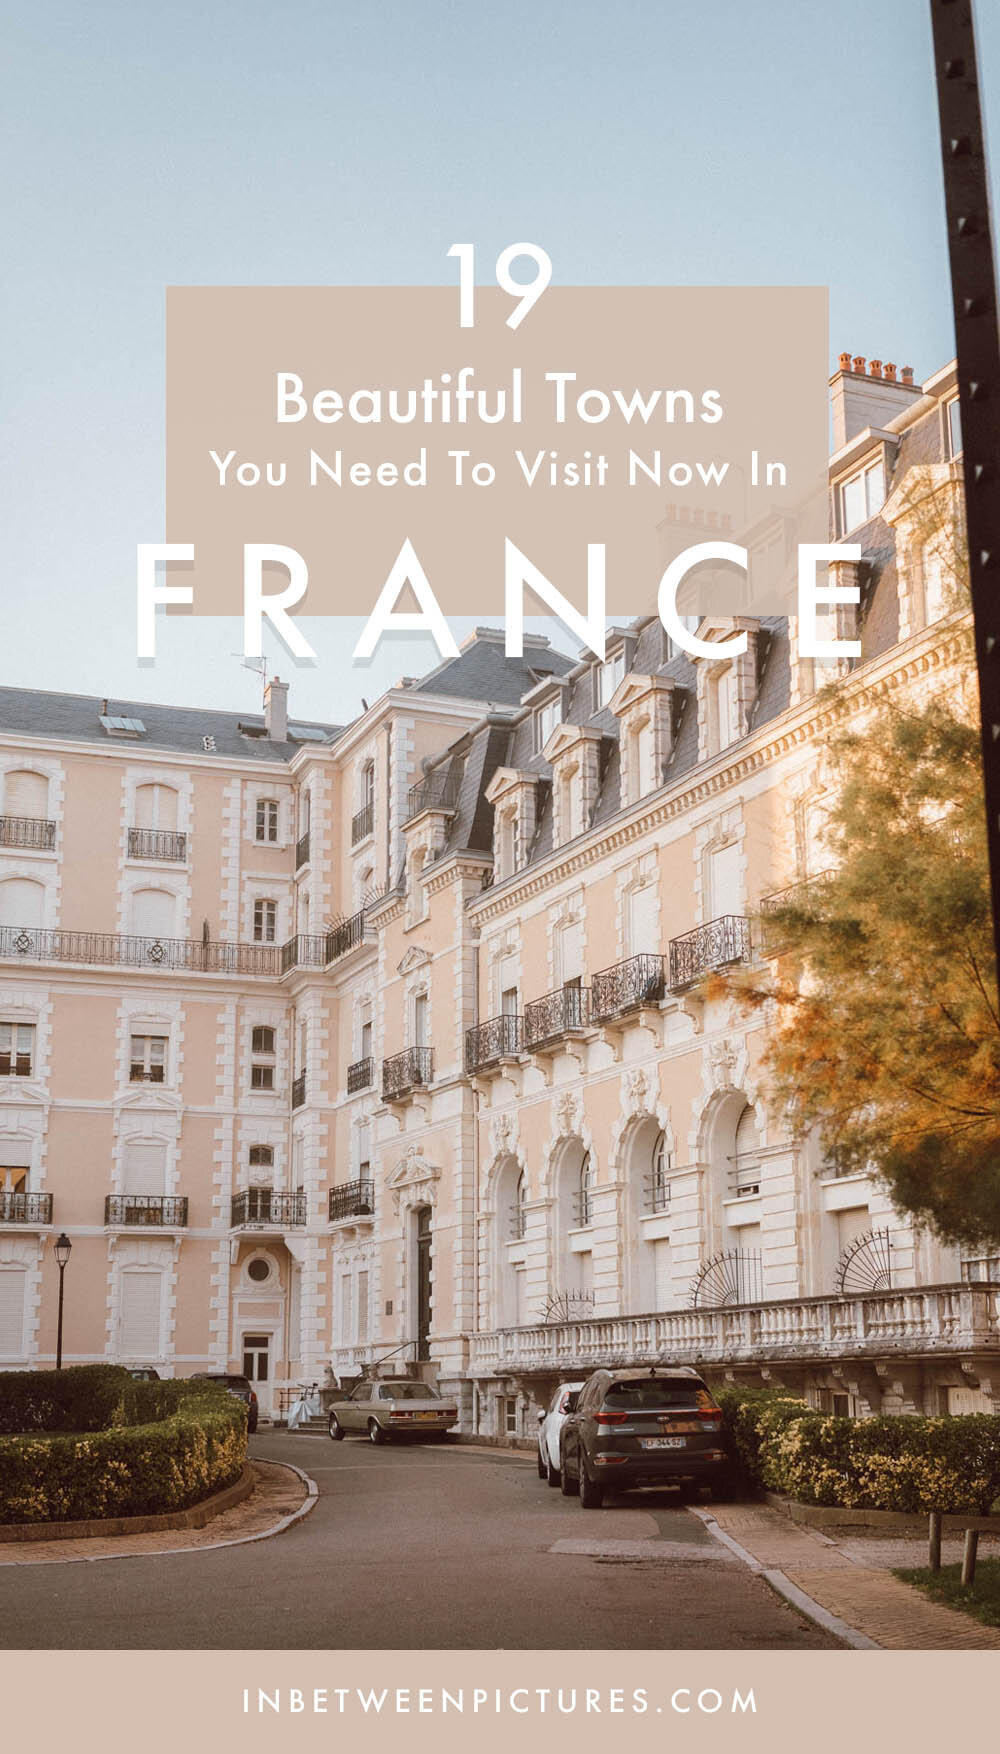 19 Underrated And Beautiful Cities in France You Need To Visit&nbsp; #France #Europe